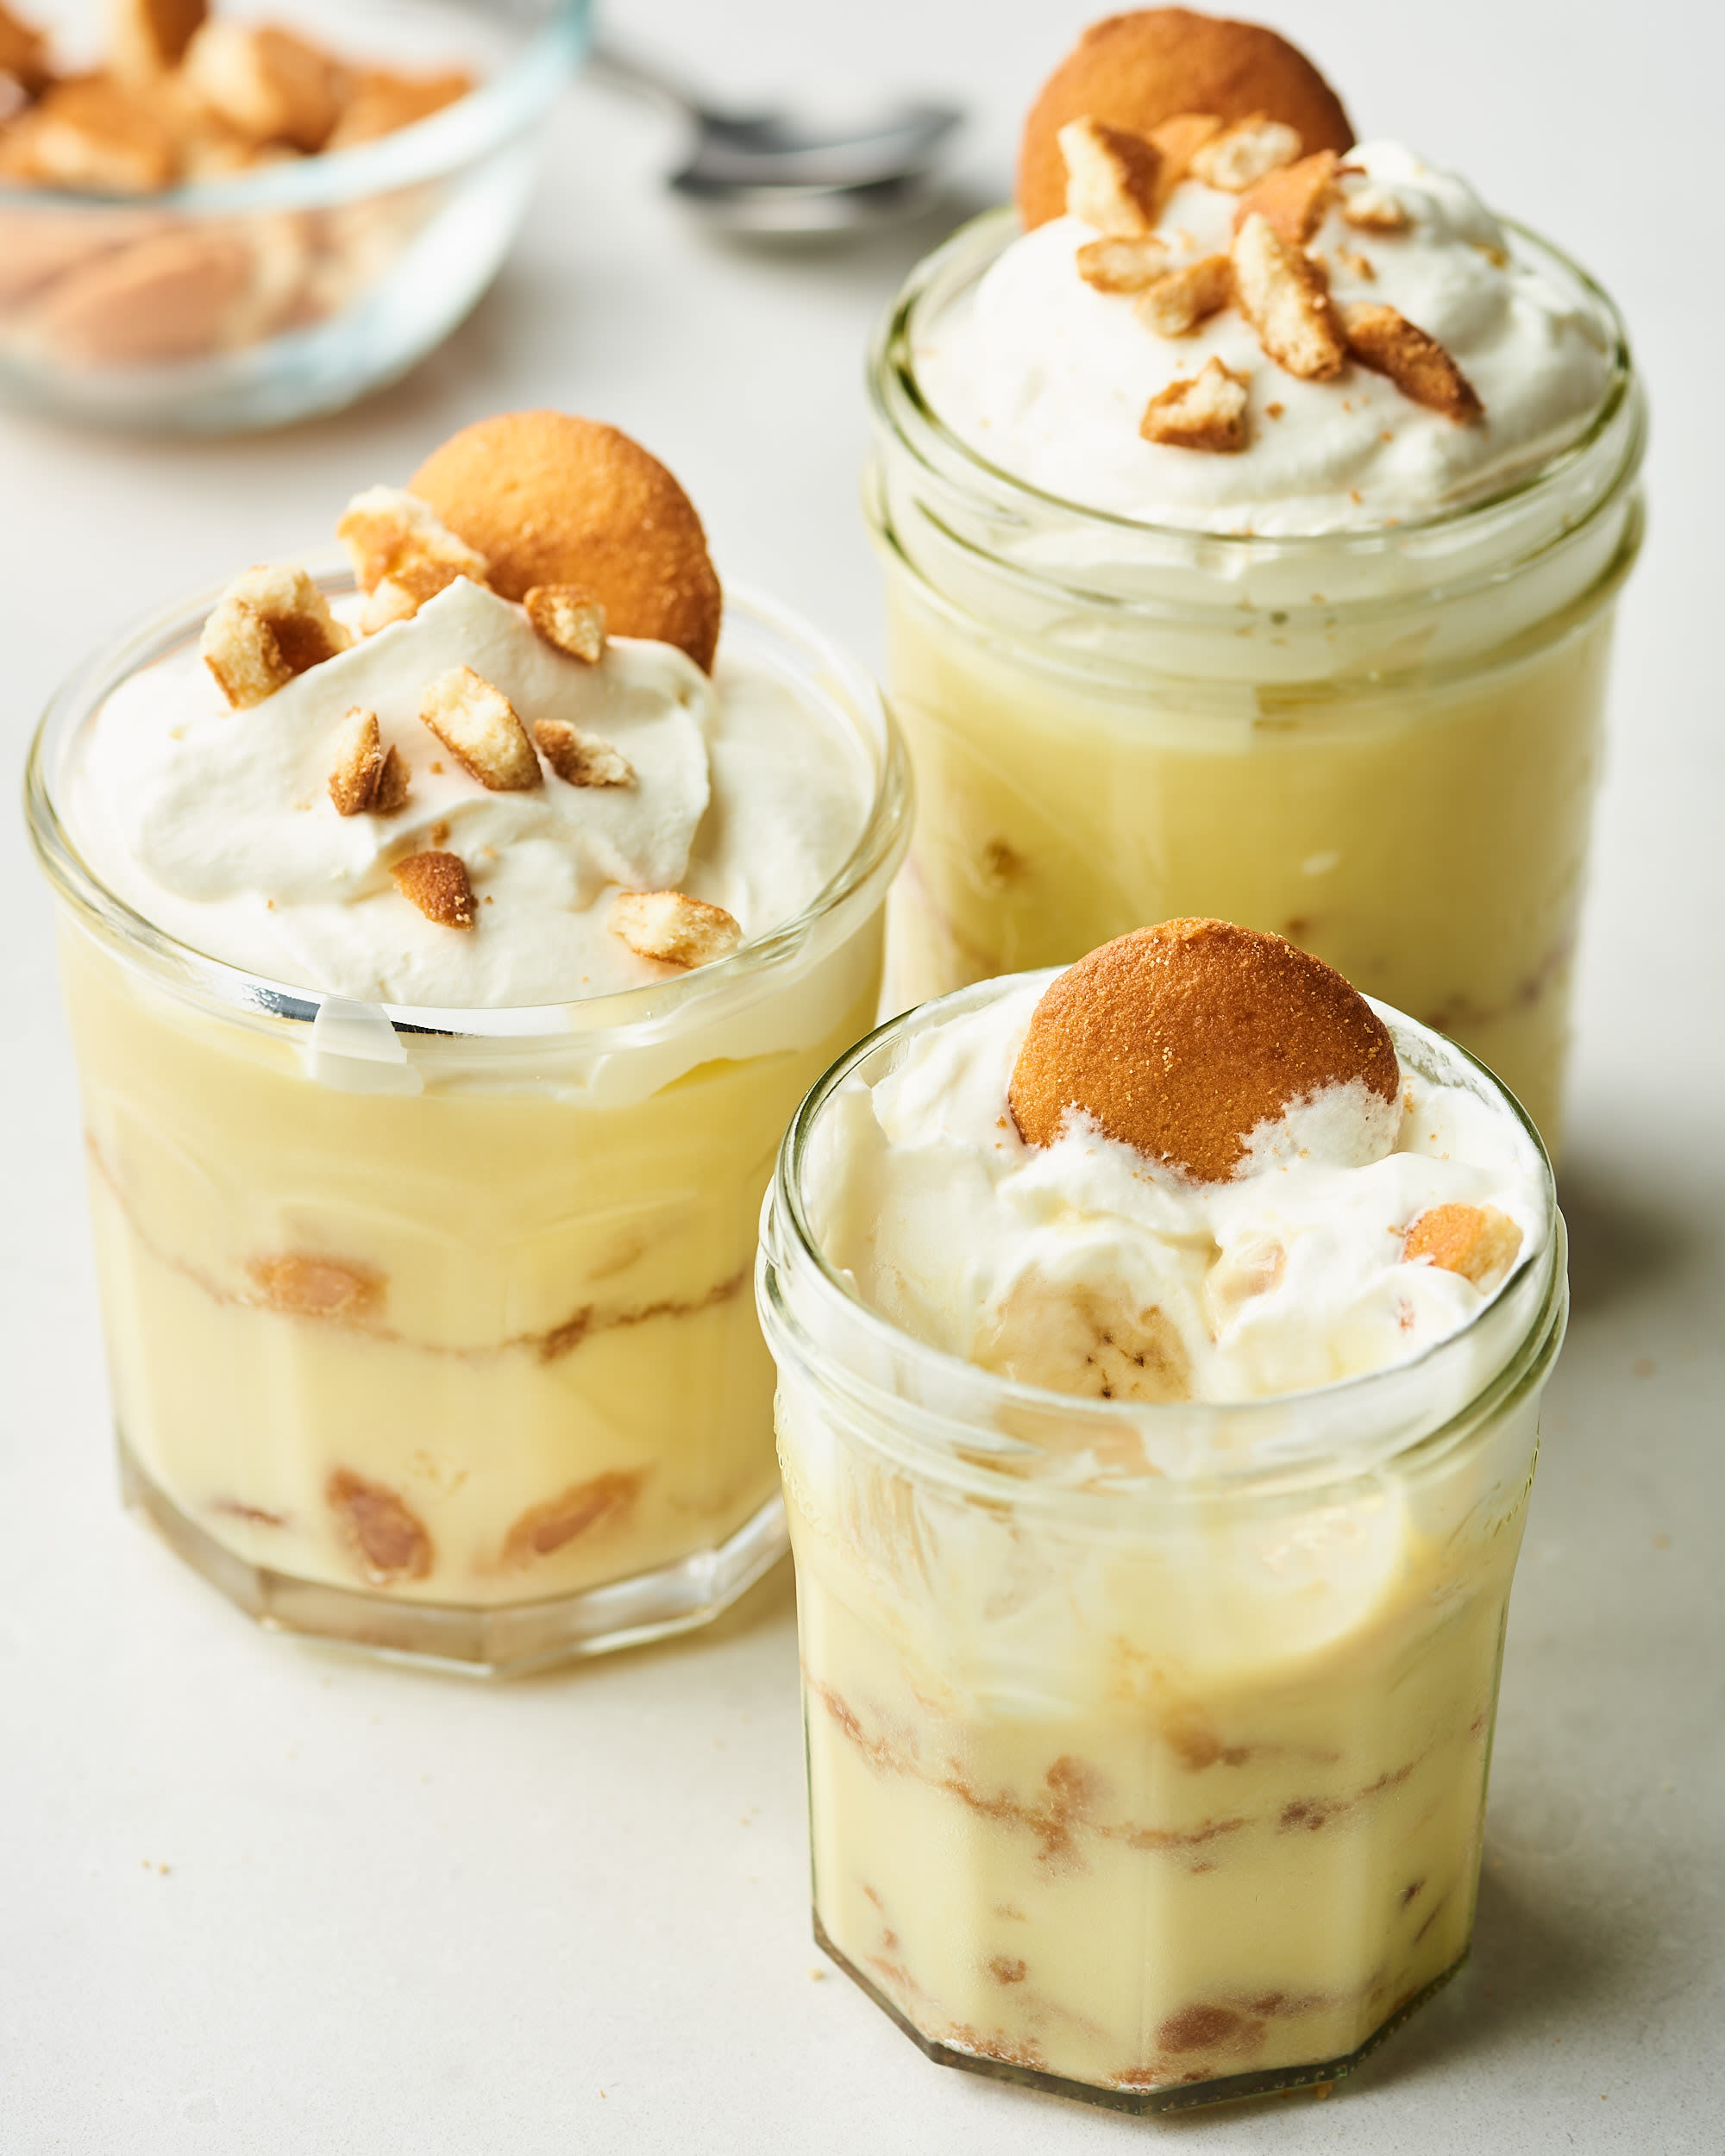 Banana_pudding_from_scratch